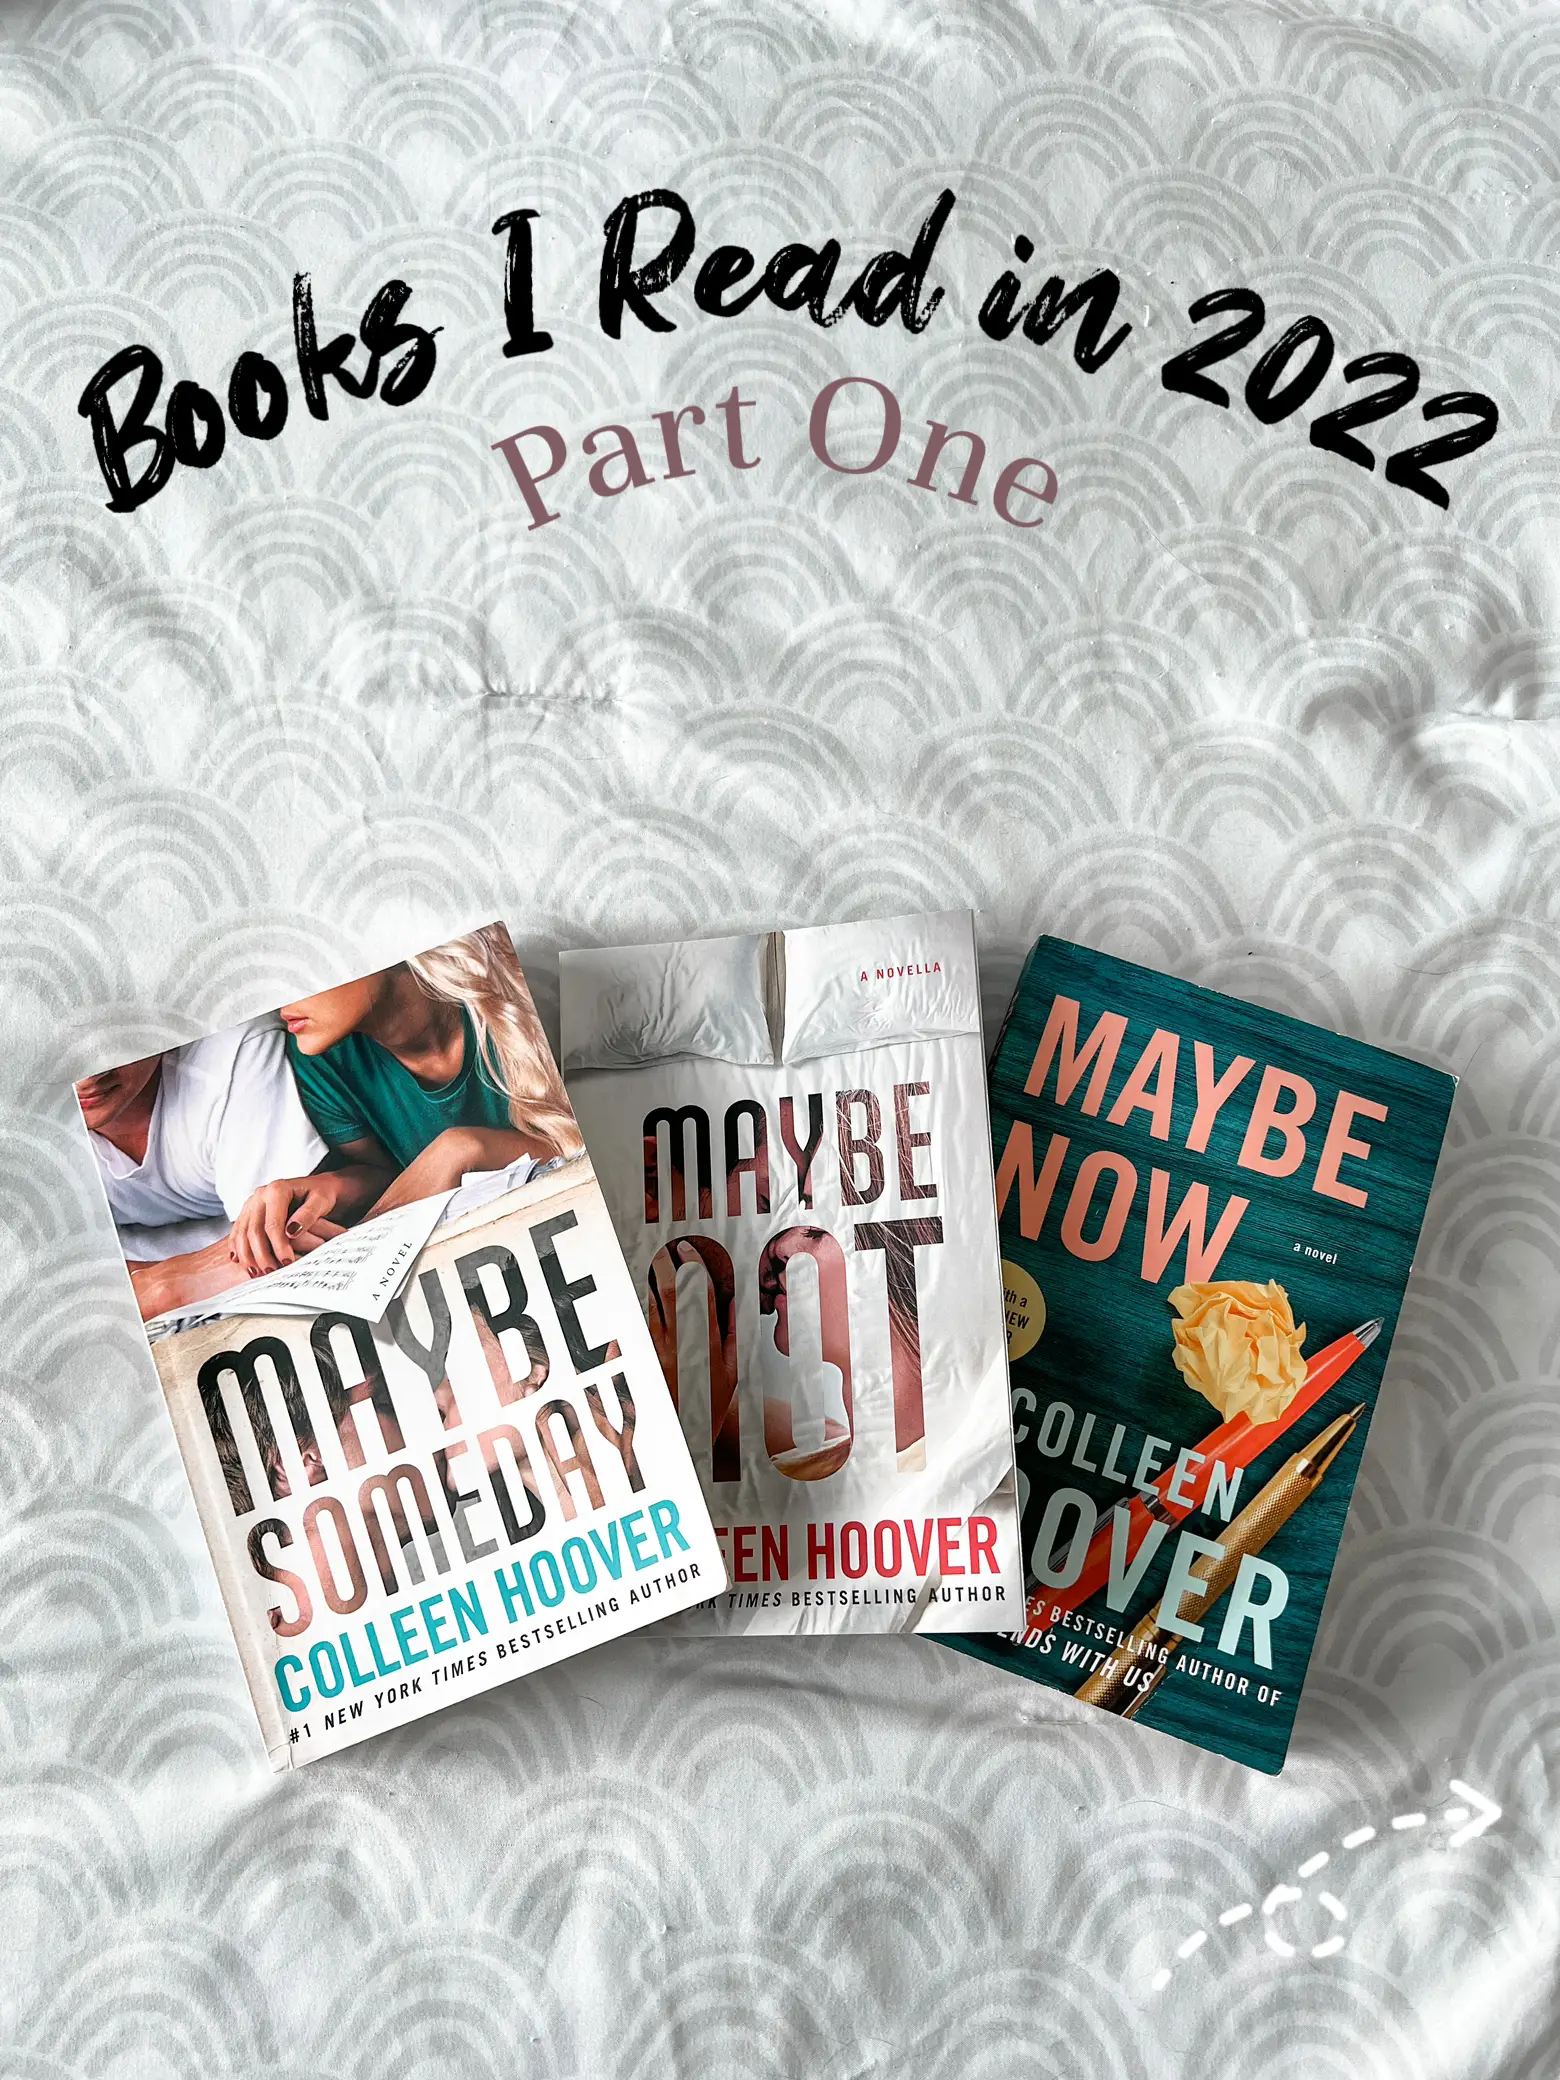 It Ends with Us by Colleen Hoover · OverDrive: ebooks, audiobooks, and more  for libraries and schools